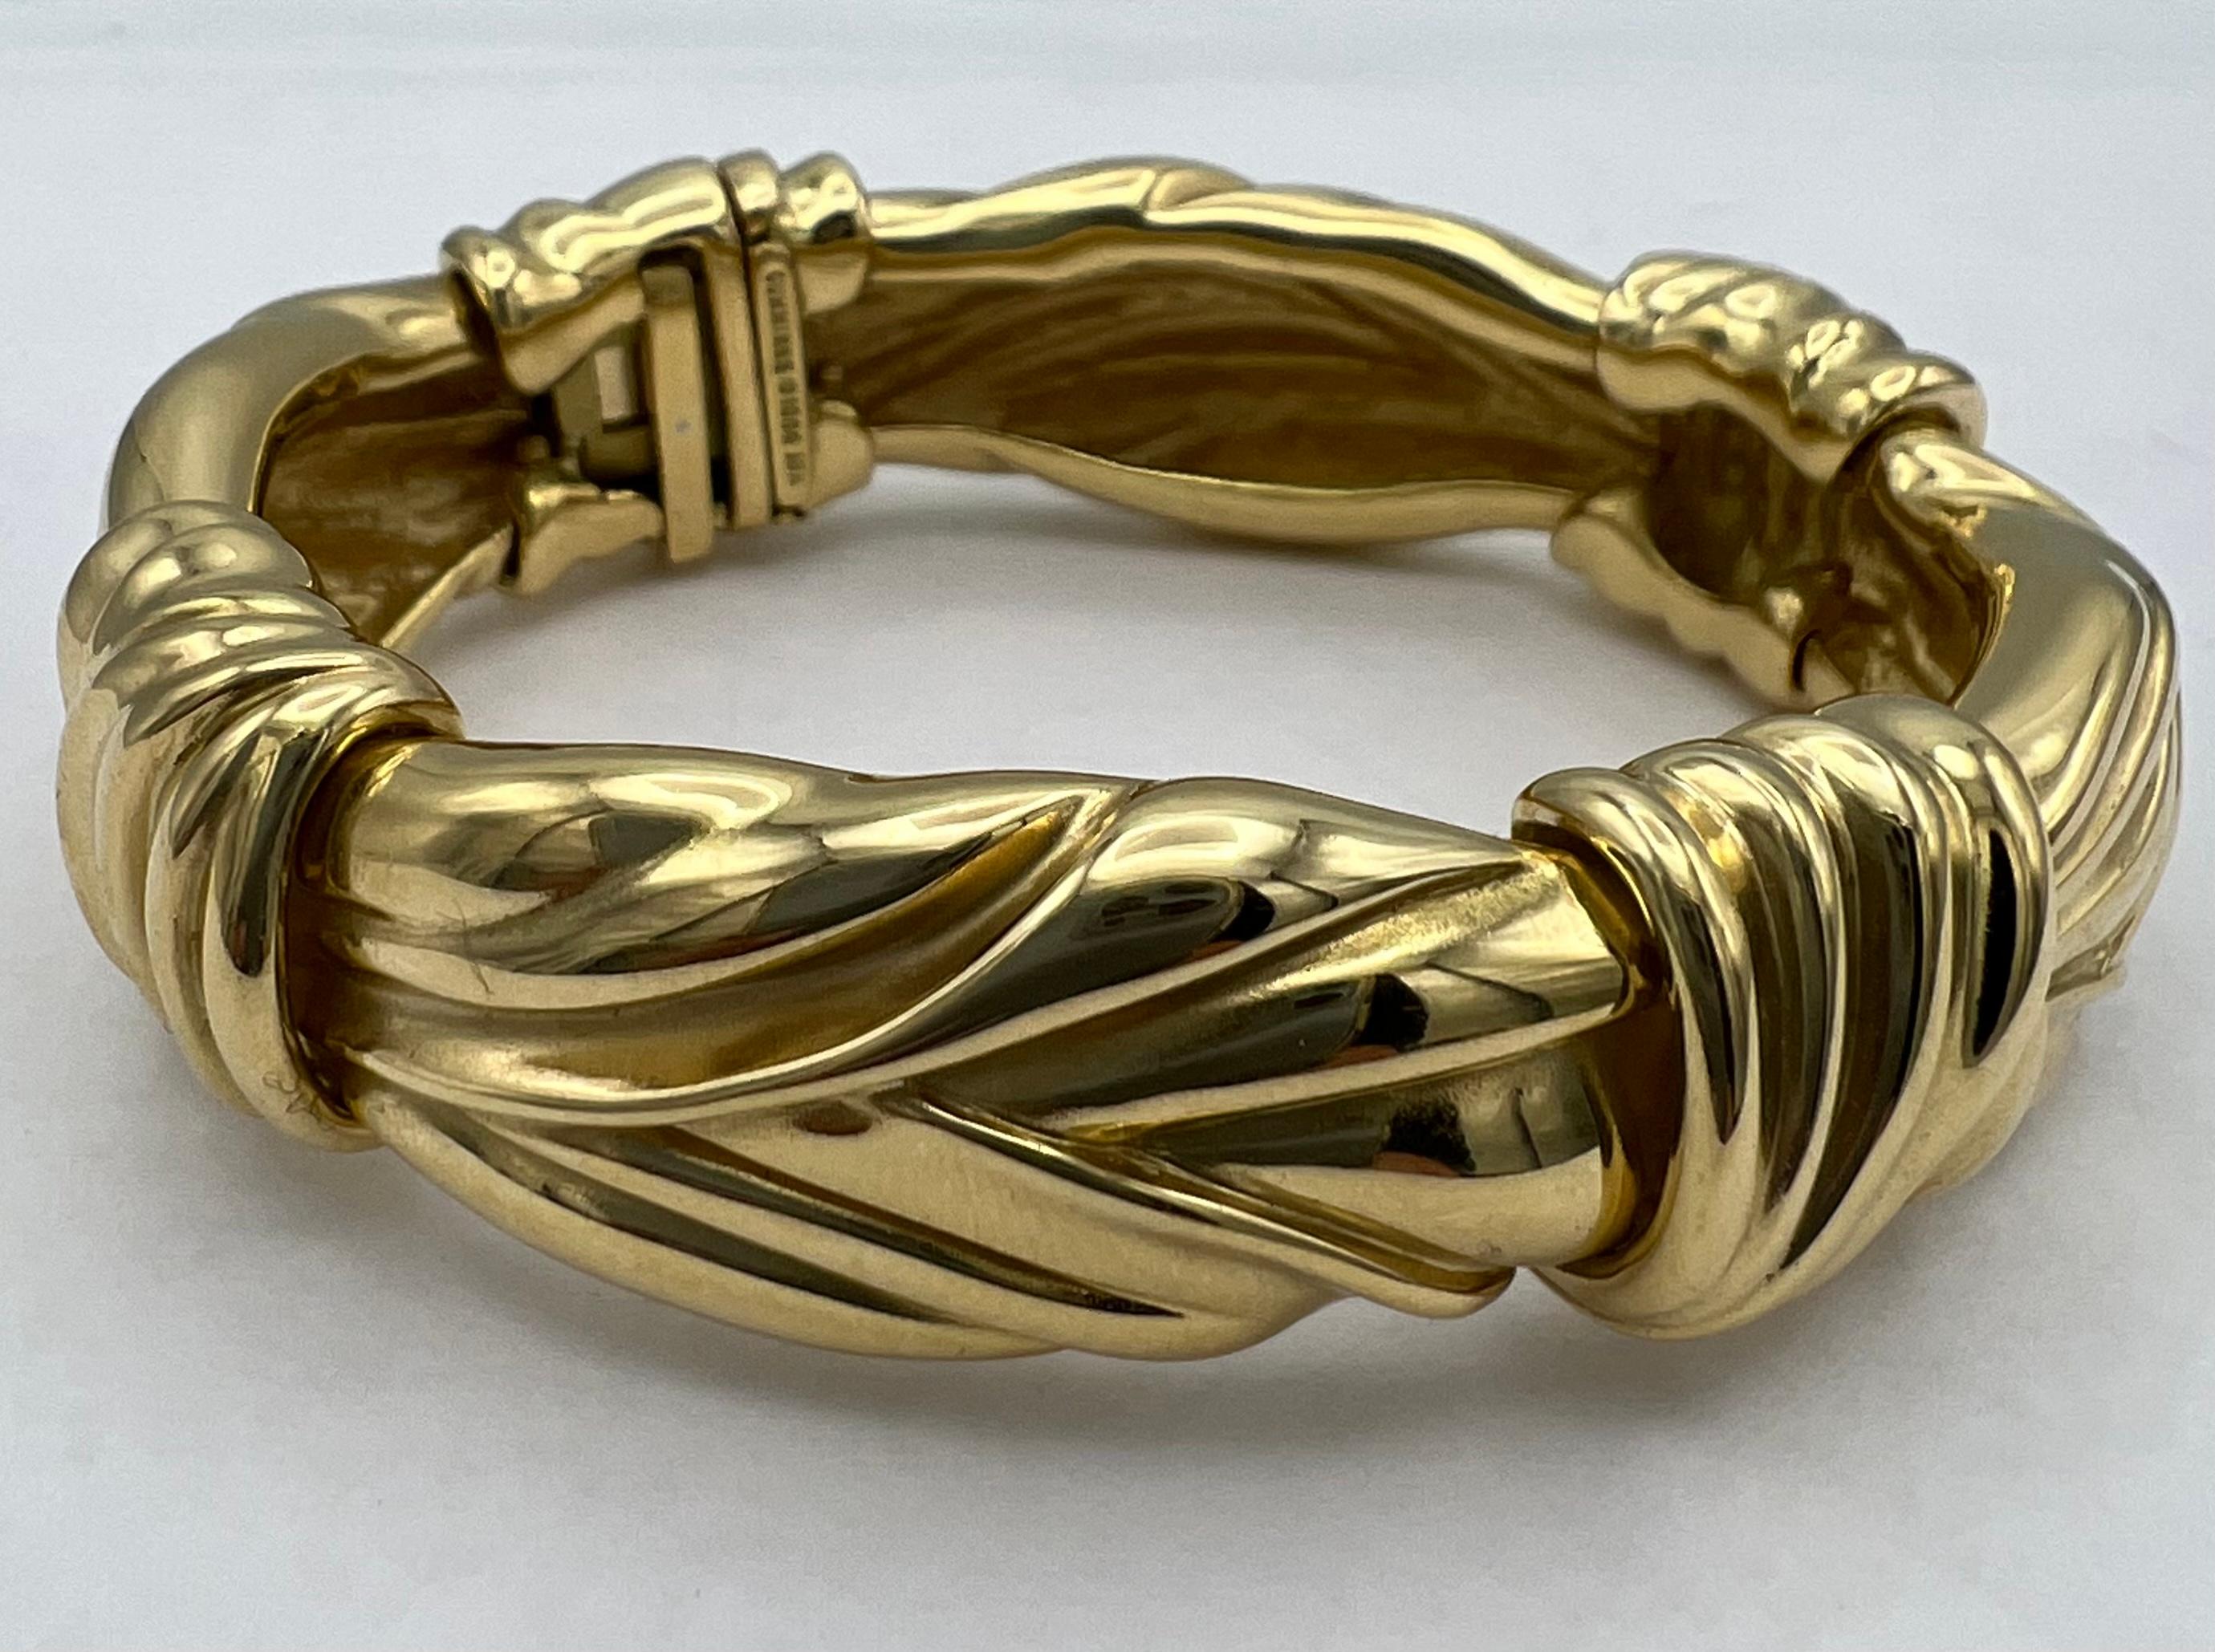 DESIGNER: Angela Cummings
CIRCA: 1984
MATERIALS: 18k Yellow Gold
WEIGHT: 90.3 grams
MEASUREMENTS: 6” x 11/16”
ITEM DETAILS:
​A glossy Angela Cummings 18k gold bangle bracelet. Stamped with the year of production (1984).​

​It is no exaggeration to